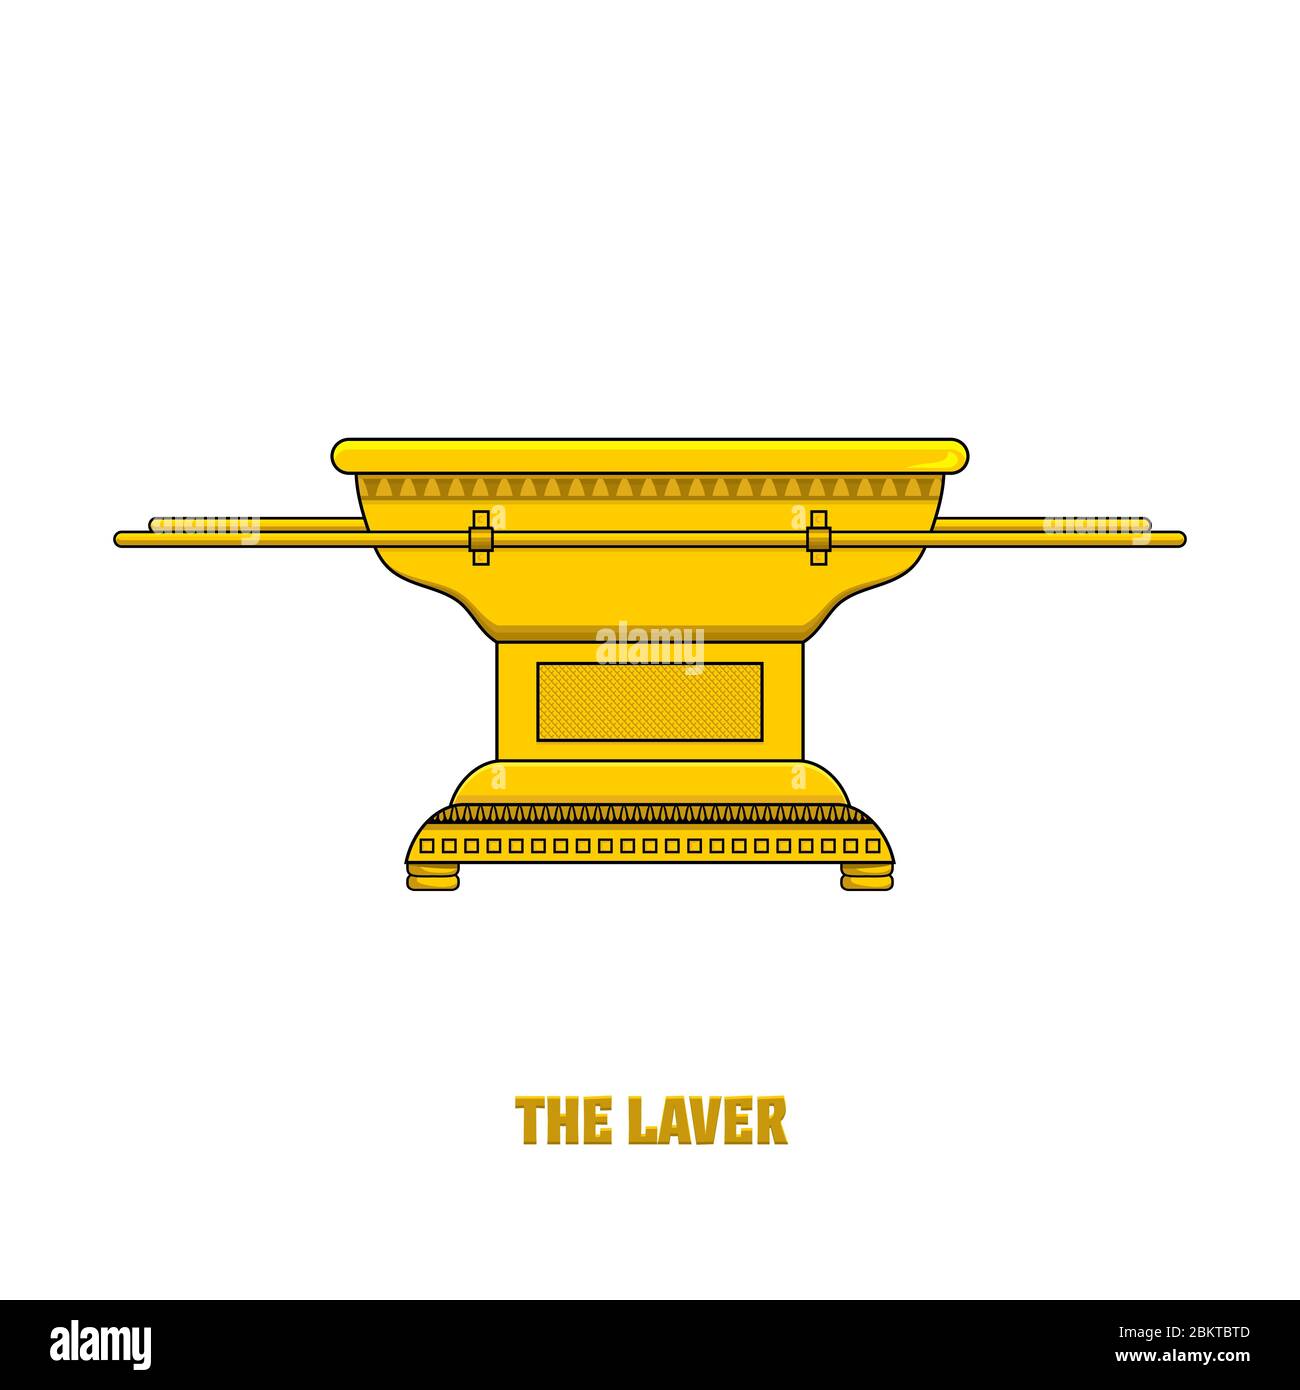 The laver, set in the tabernacle and temple of Solomon. A ritual object in the rites of the Jewish religion. Stock Vector